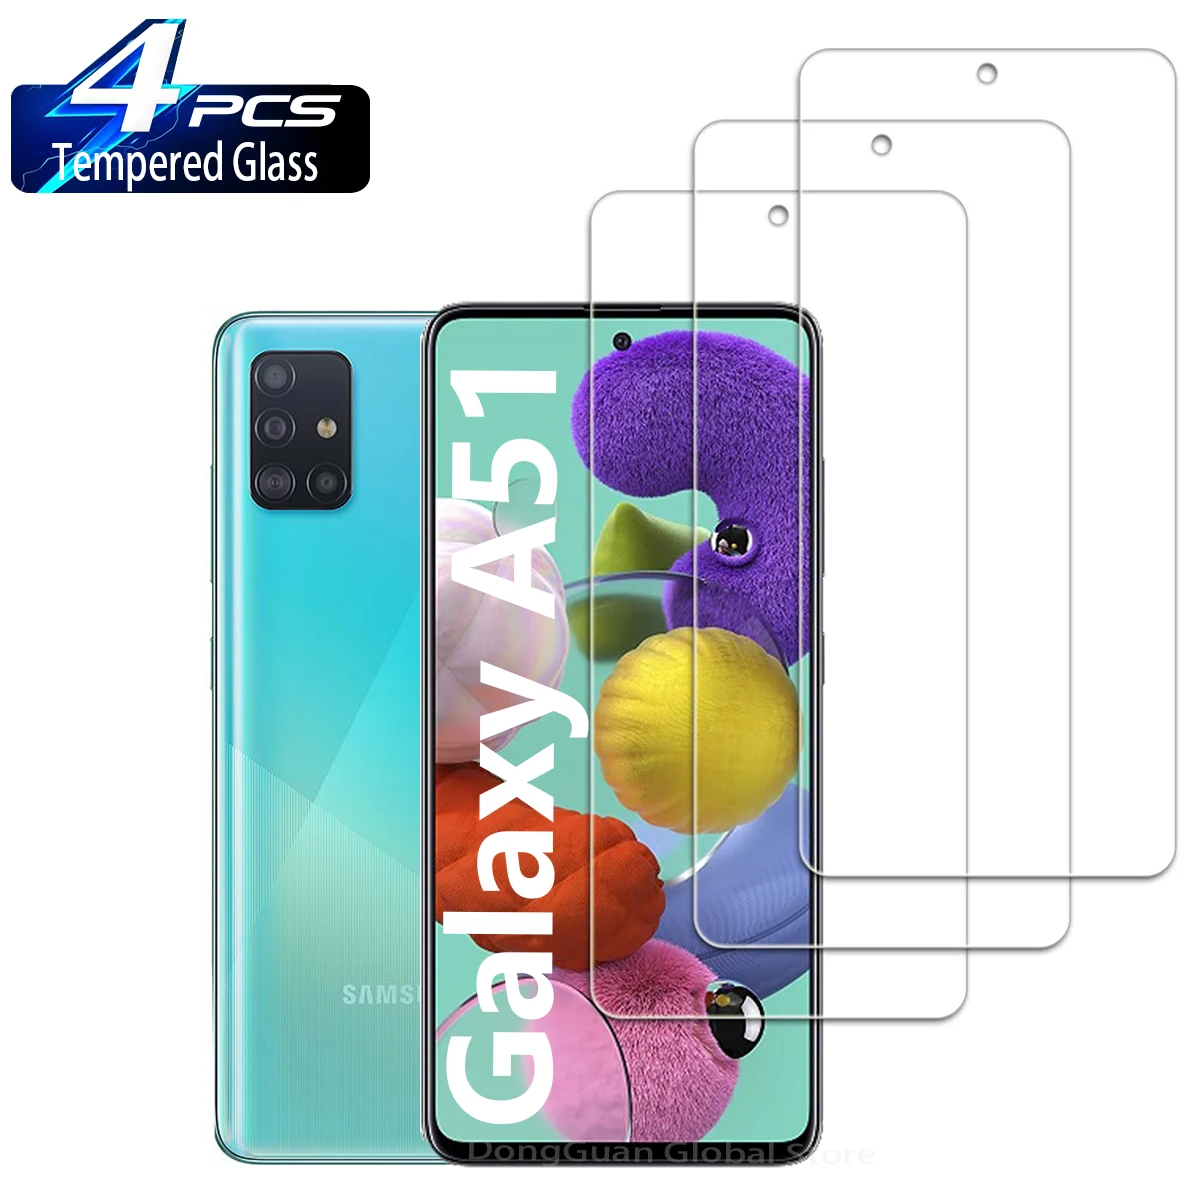 2/4Pcs Tempered Glass For Samsung Galaxy A51 Screen Protector Glass Film tempered glass for samsung galaxy a11 a12 a21 a21s a31 a41 a51 a71 m11 m21 m21s m31 m31s protective film screen protector cover